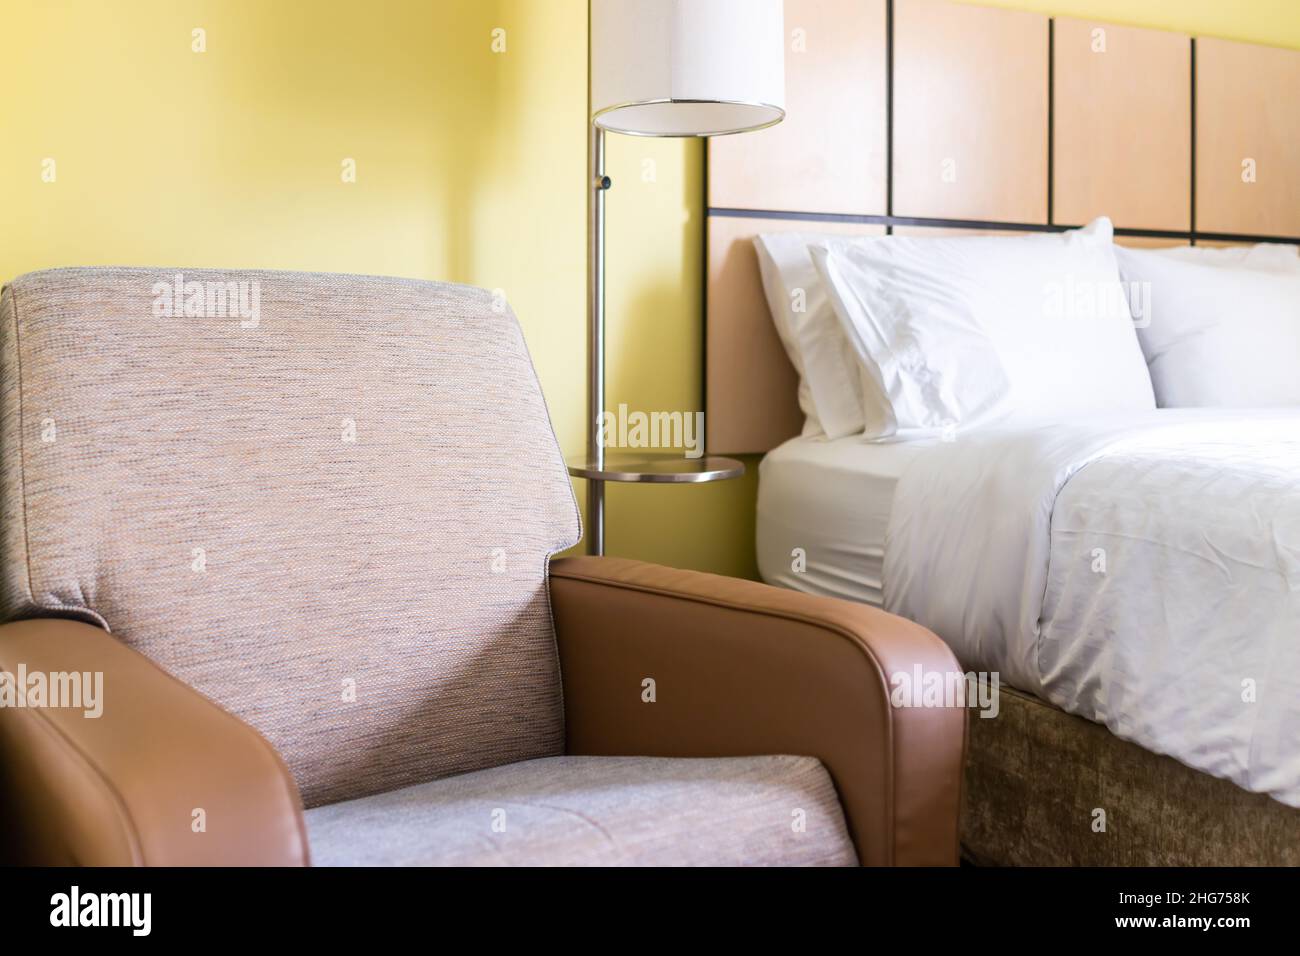 Bedroom room closeup of couch chair armseat with lamp white pillows sheets on mattress bed headboard in modern hotel motel room with nobody Stock Photo